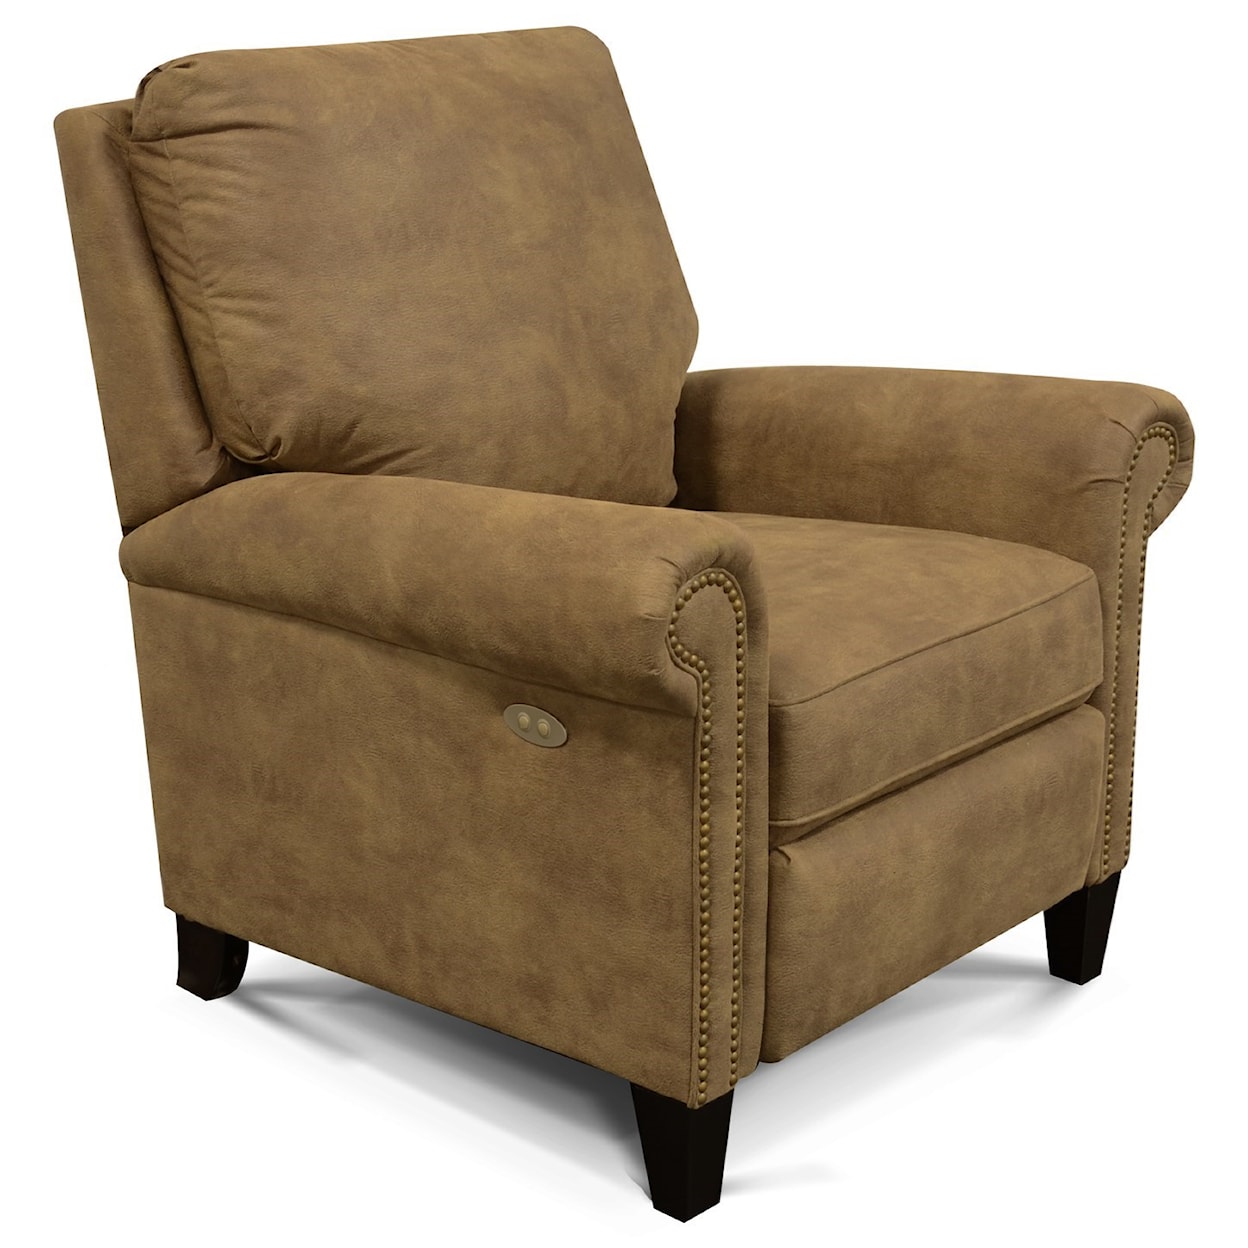 England Price 3P00 High-Leg Reclining Chair with Nailheads